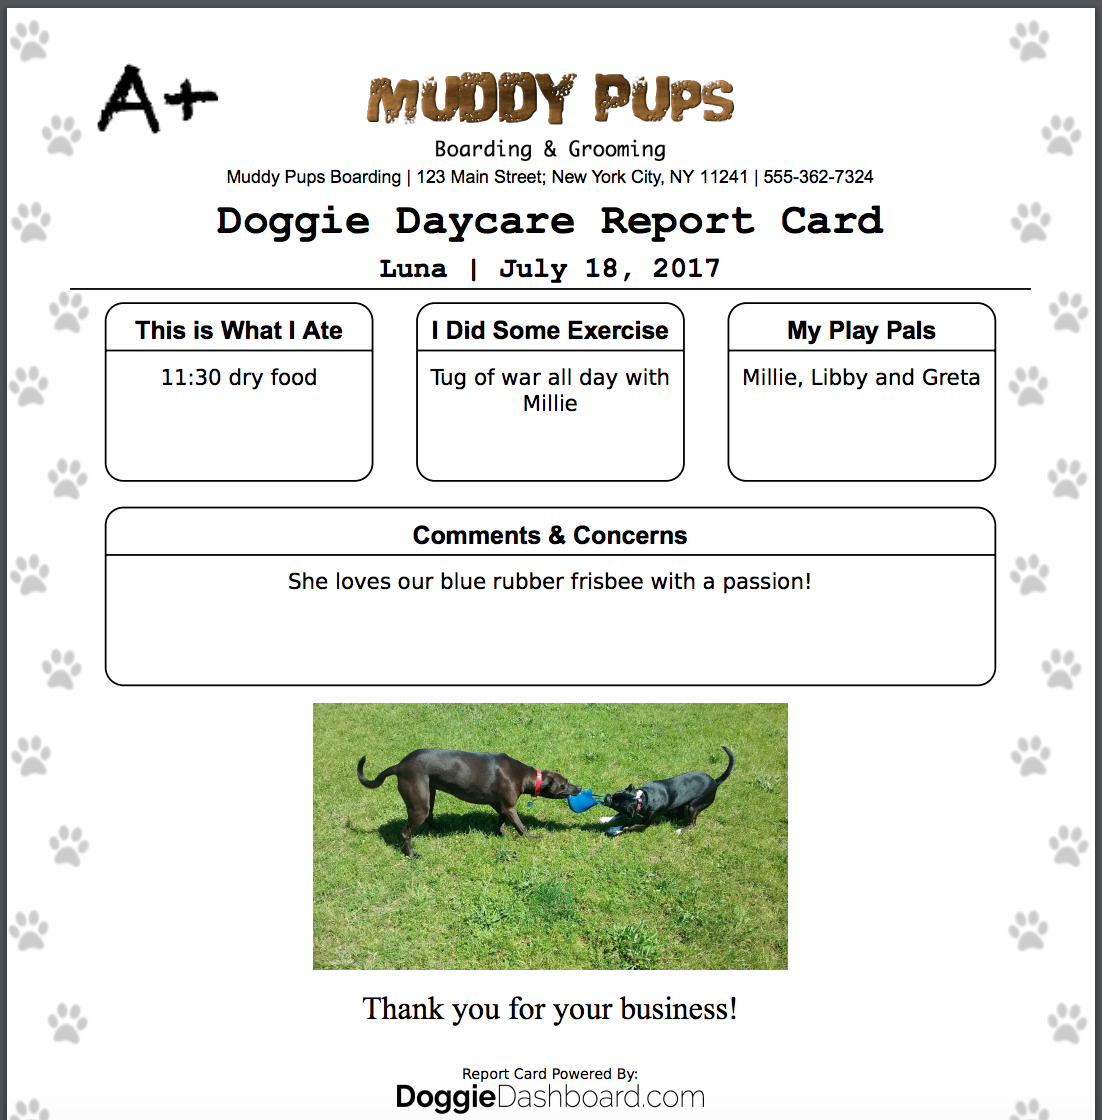 Doggiedashboard | Free Dog Daycare & Kennel Boarding Software Within Dog Grooming Record Card Template